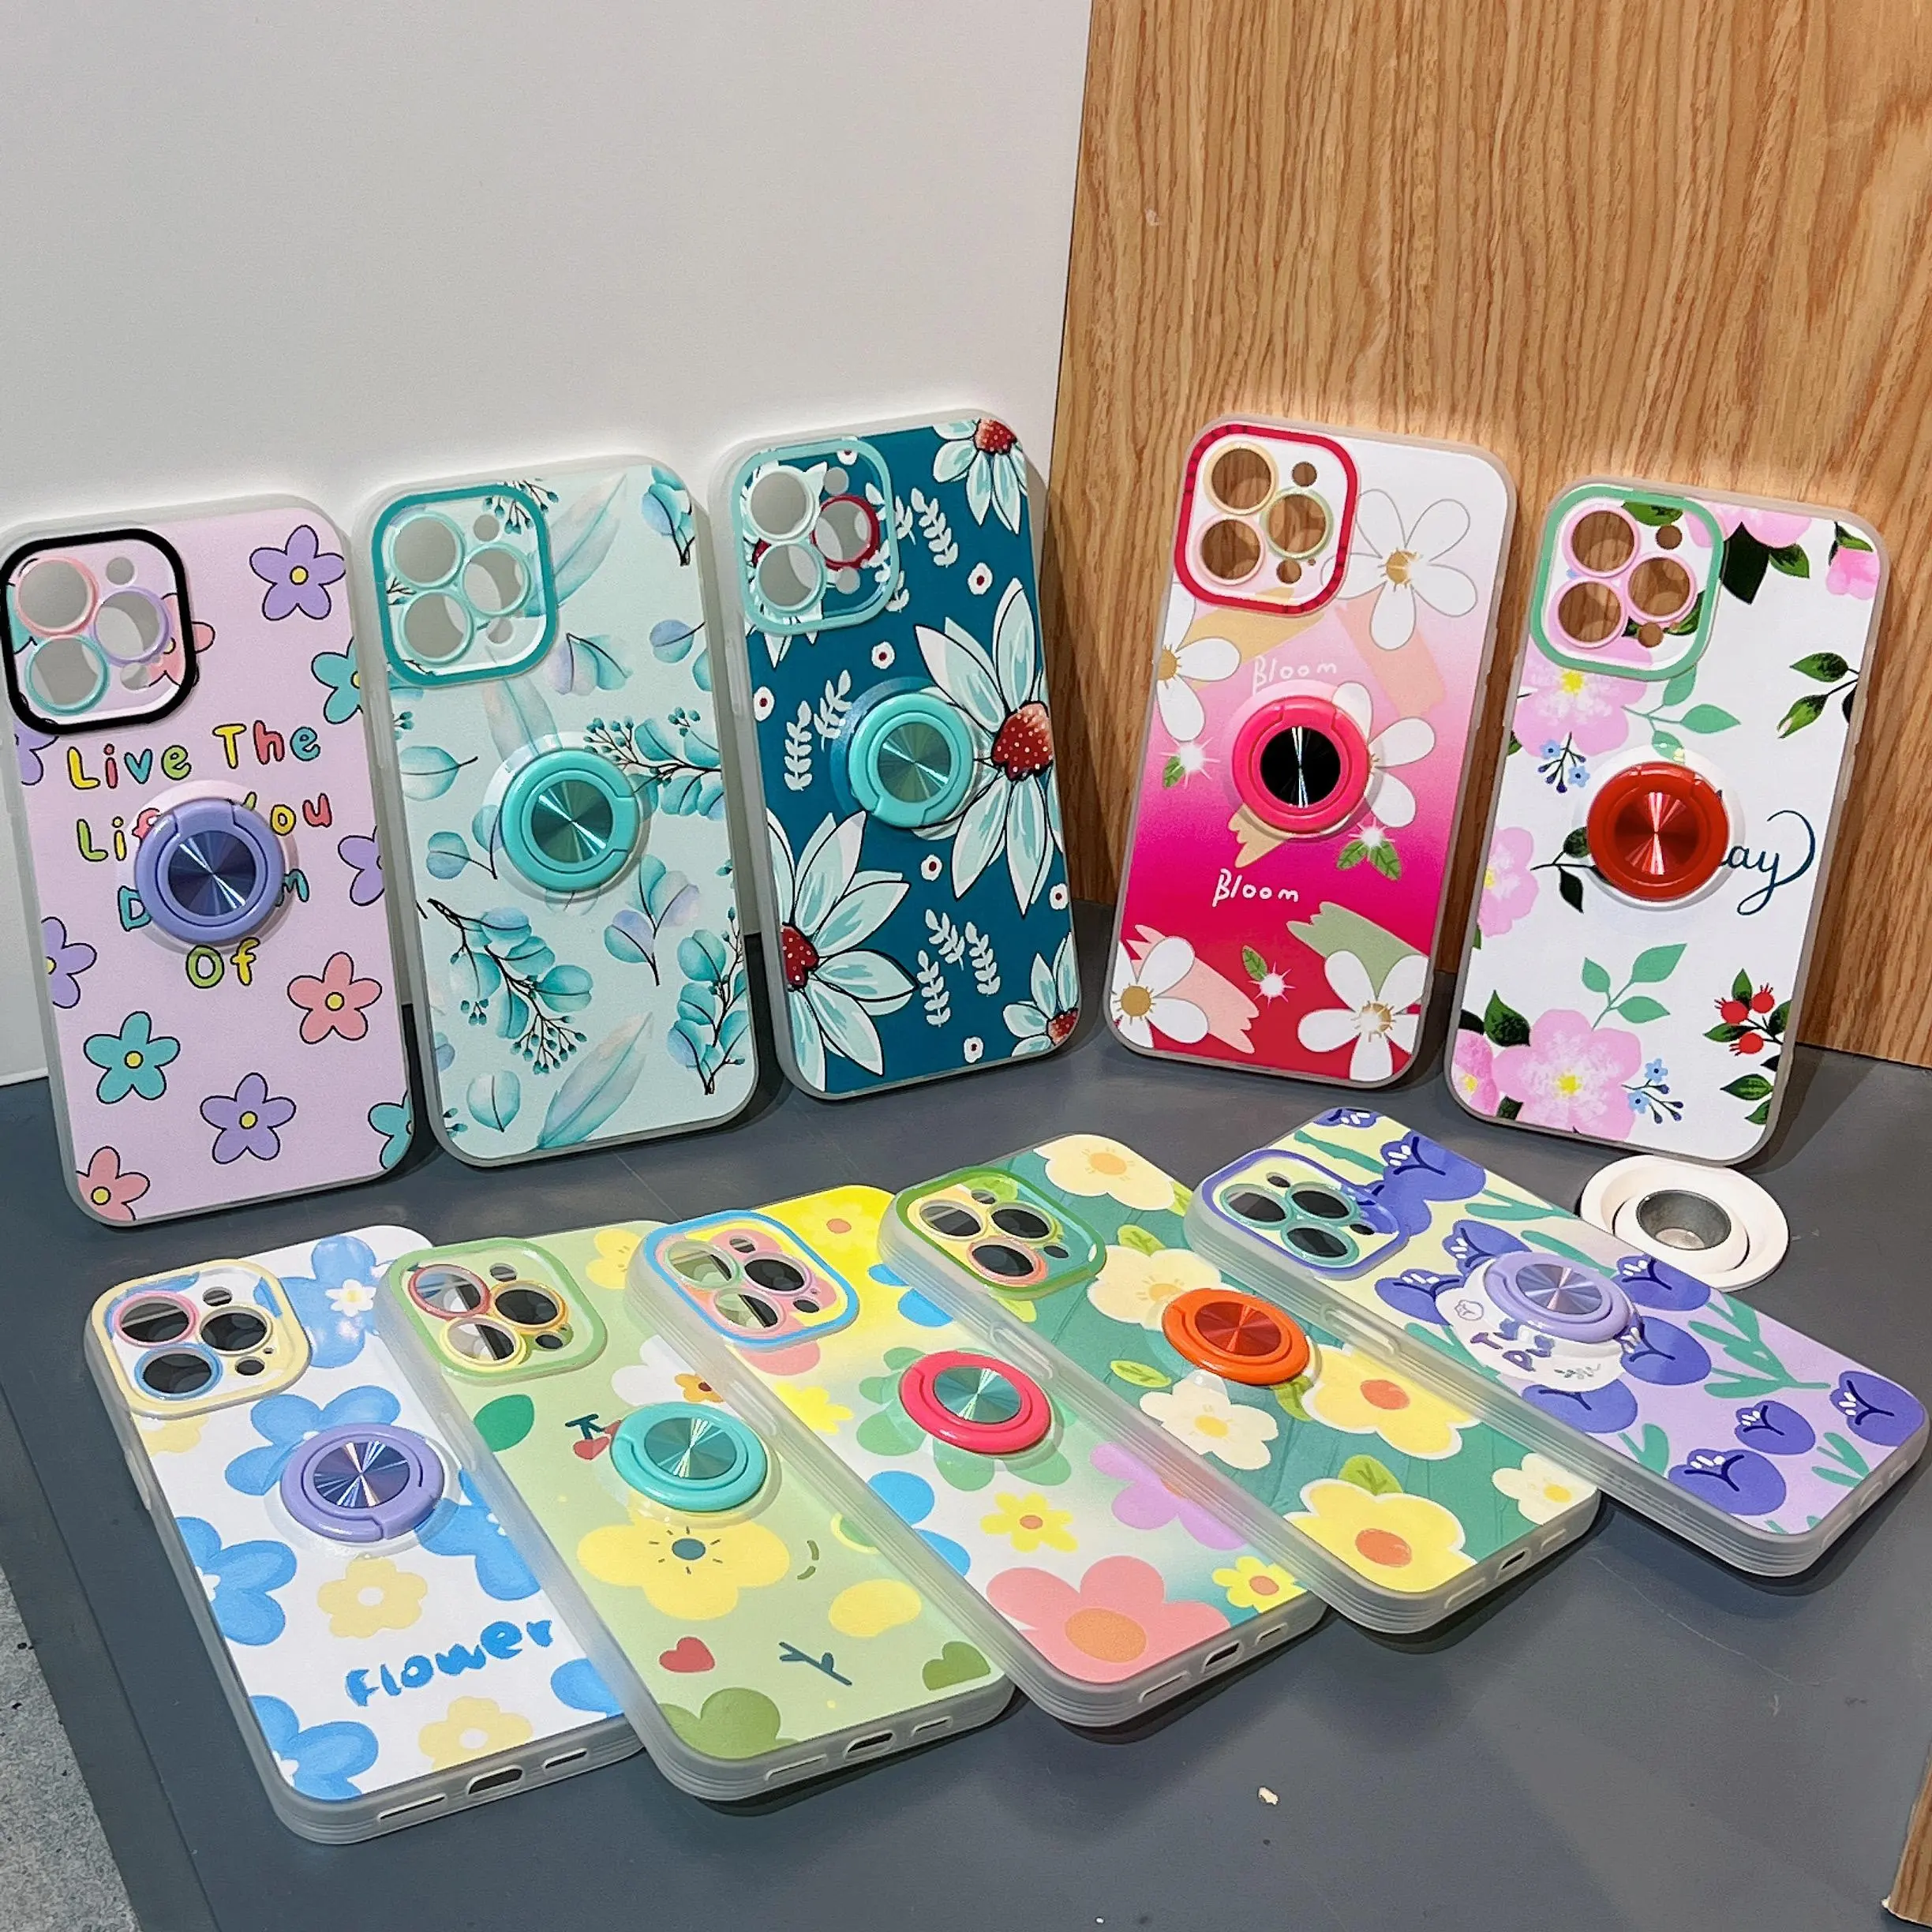 Nieuwe Oem Print Case Con Soporte Cover Ring Houder Tpu Fundas Movil Protector Forros Carcases Celulares Voor Iphone